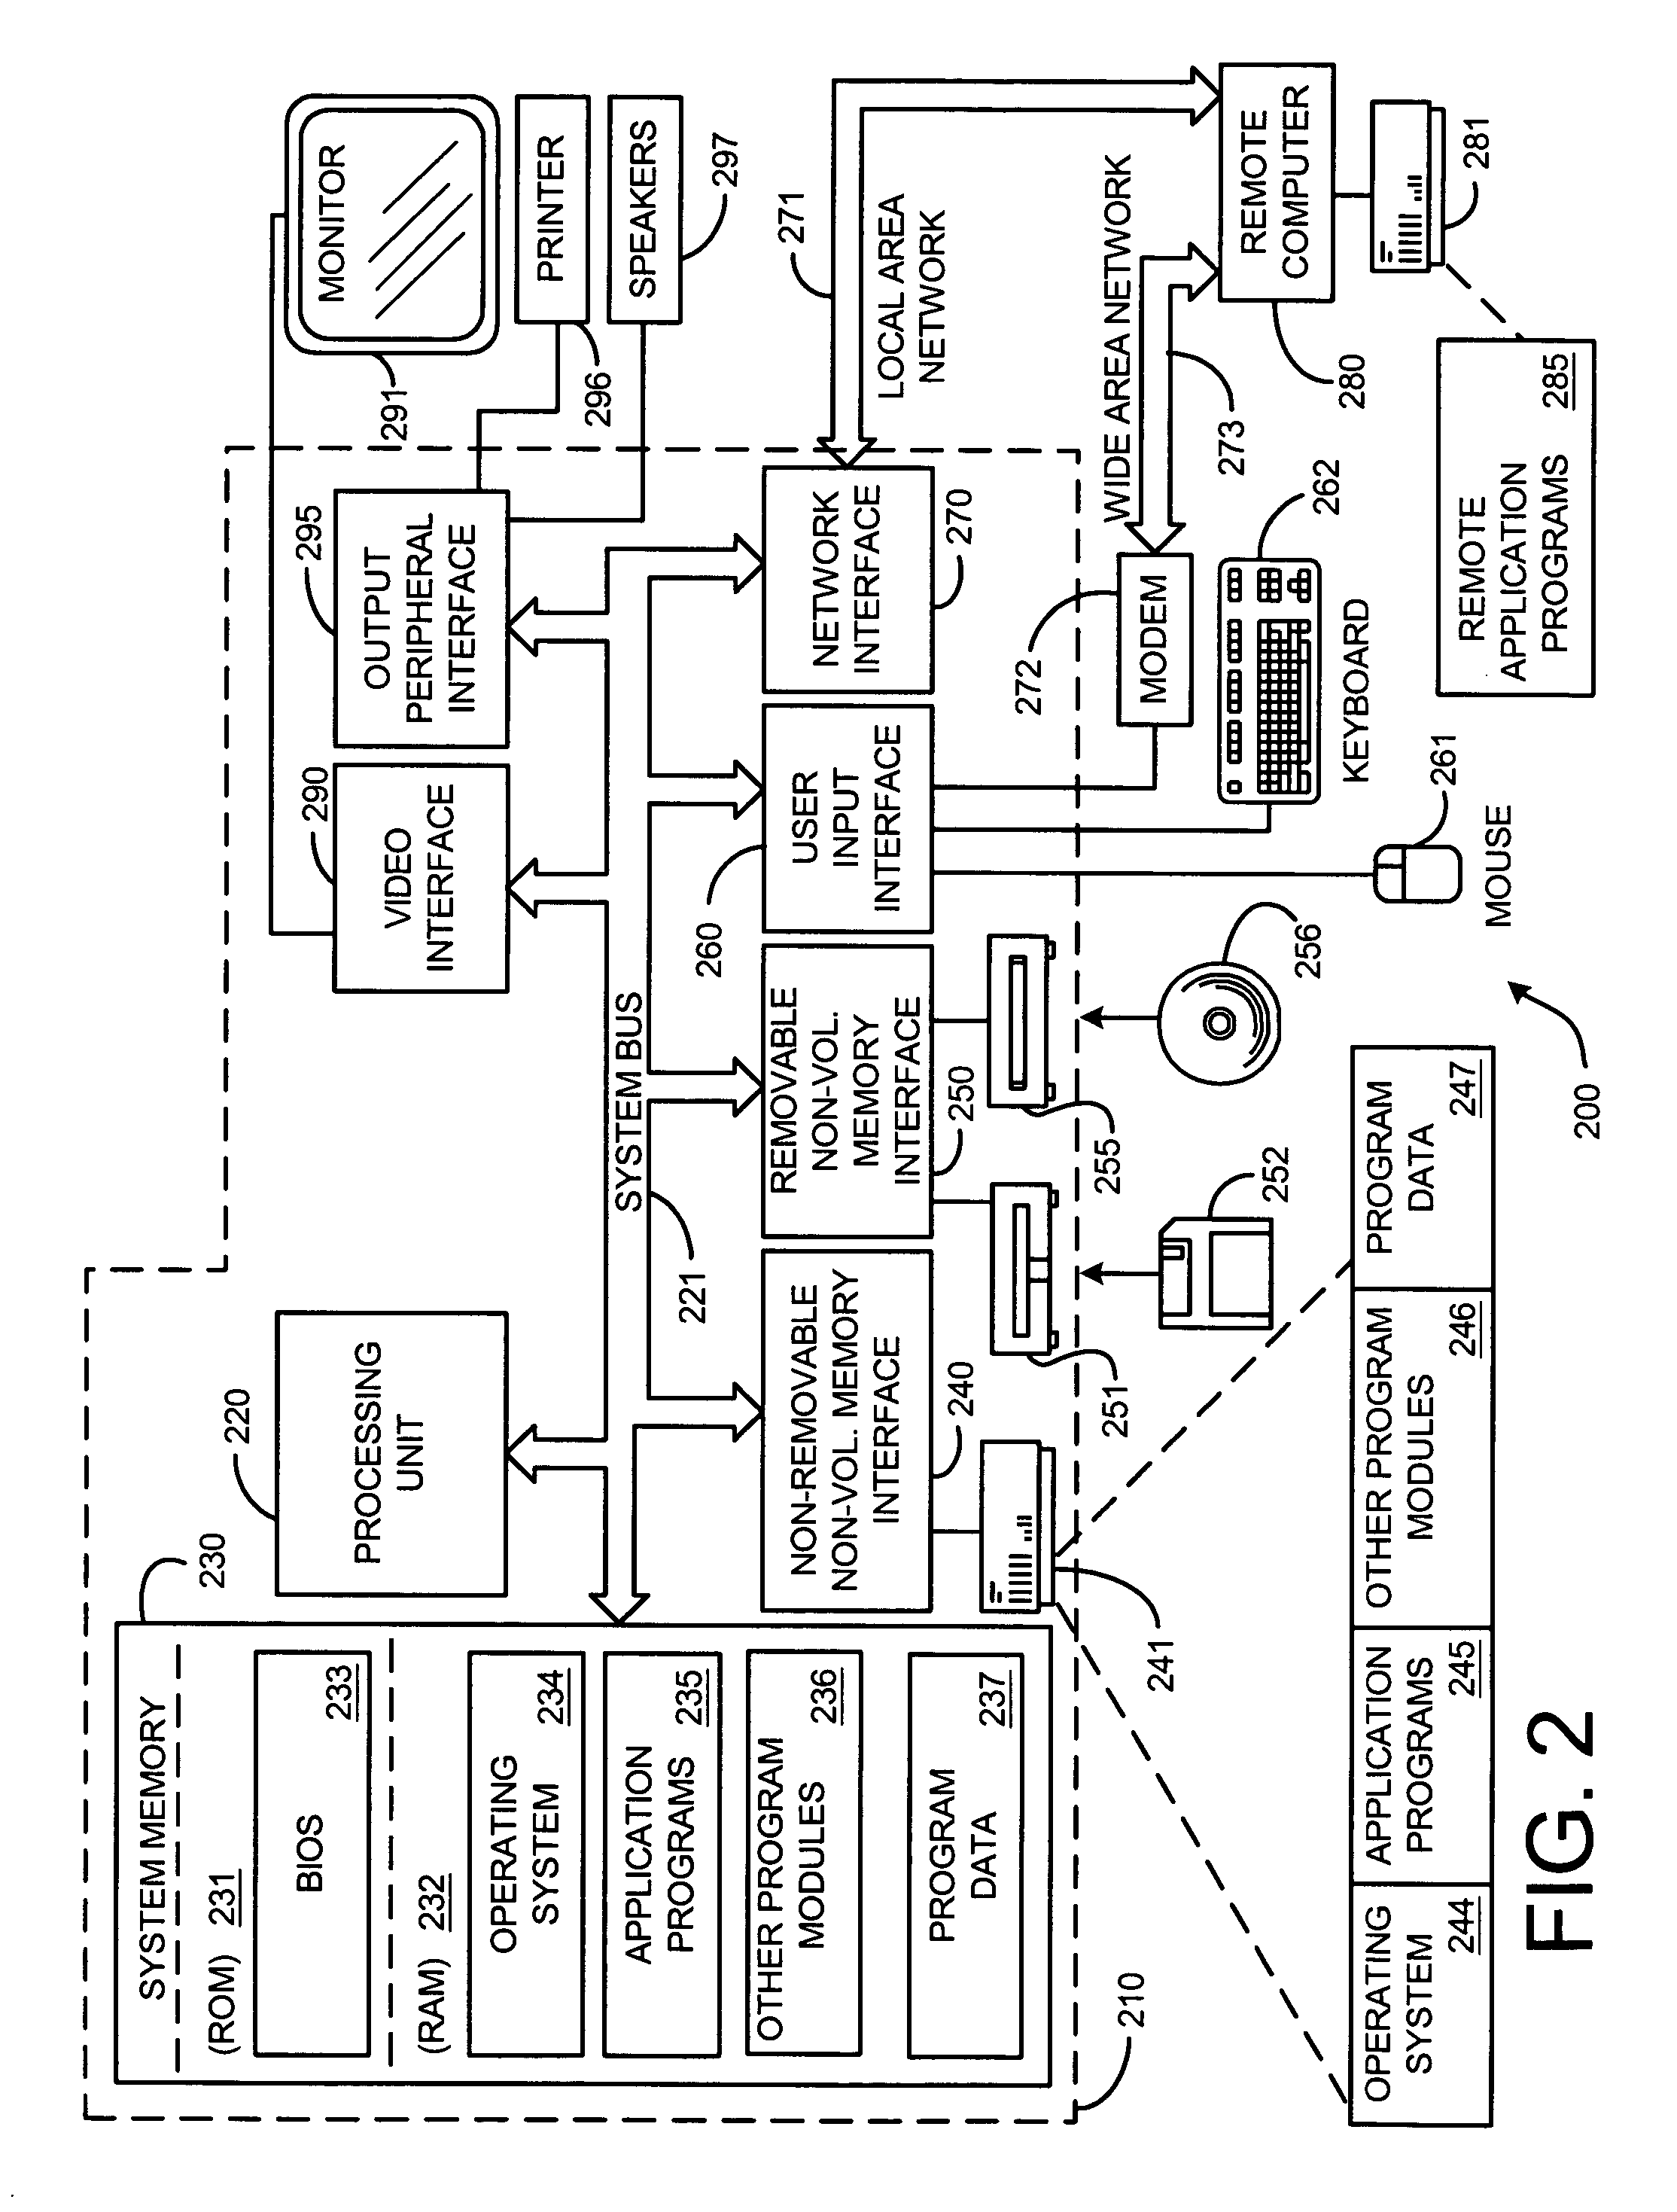 Hierarchical data compression system and method for coding video data